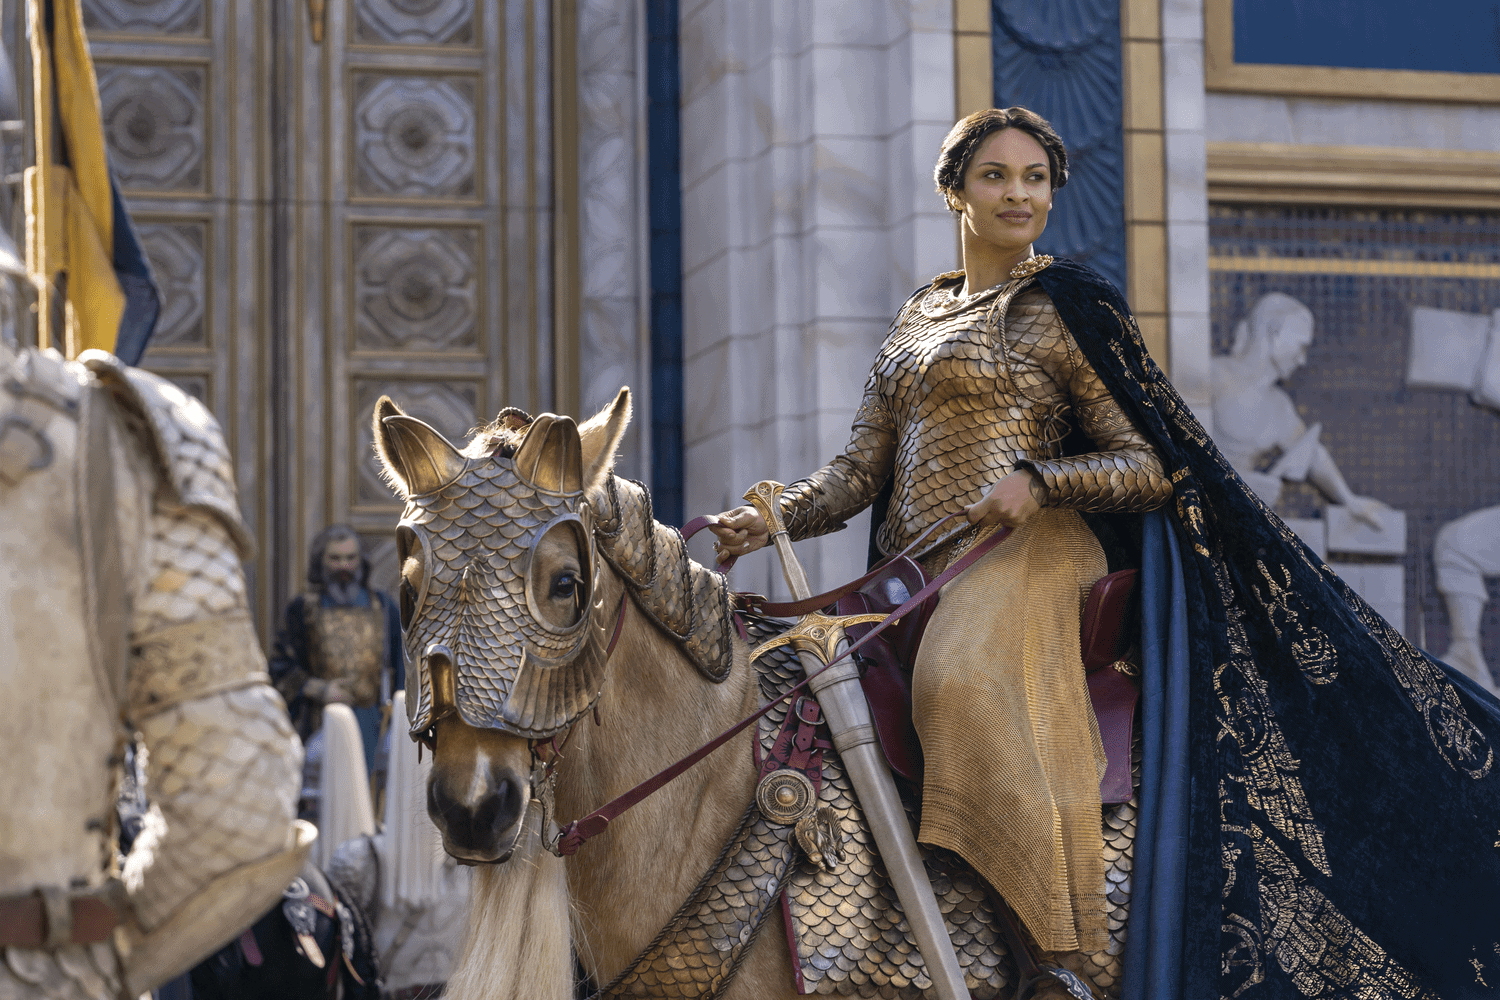 Míriel wearing gold armor and riding a royal horse